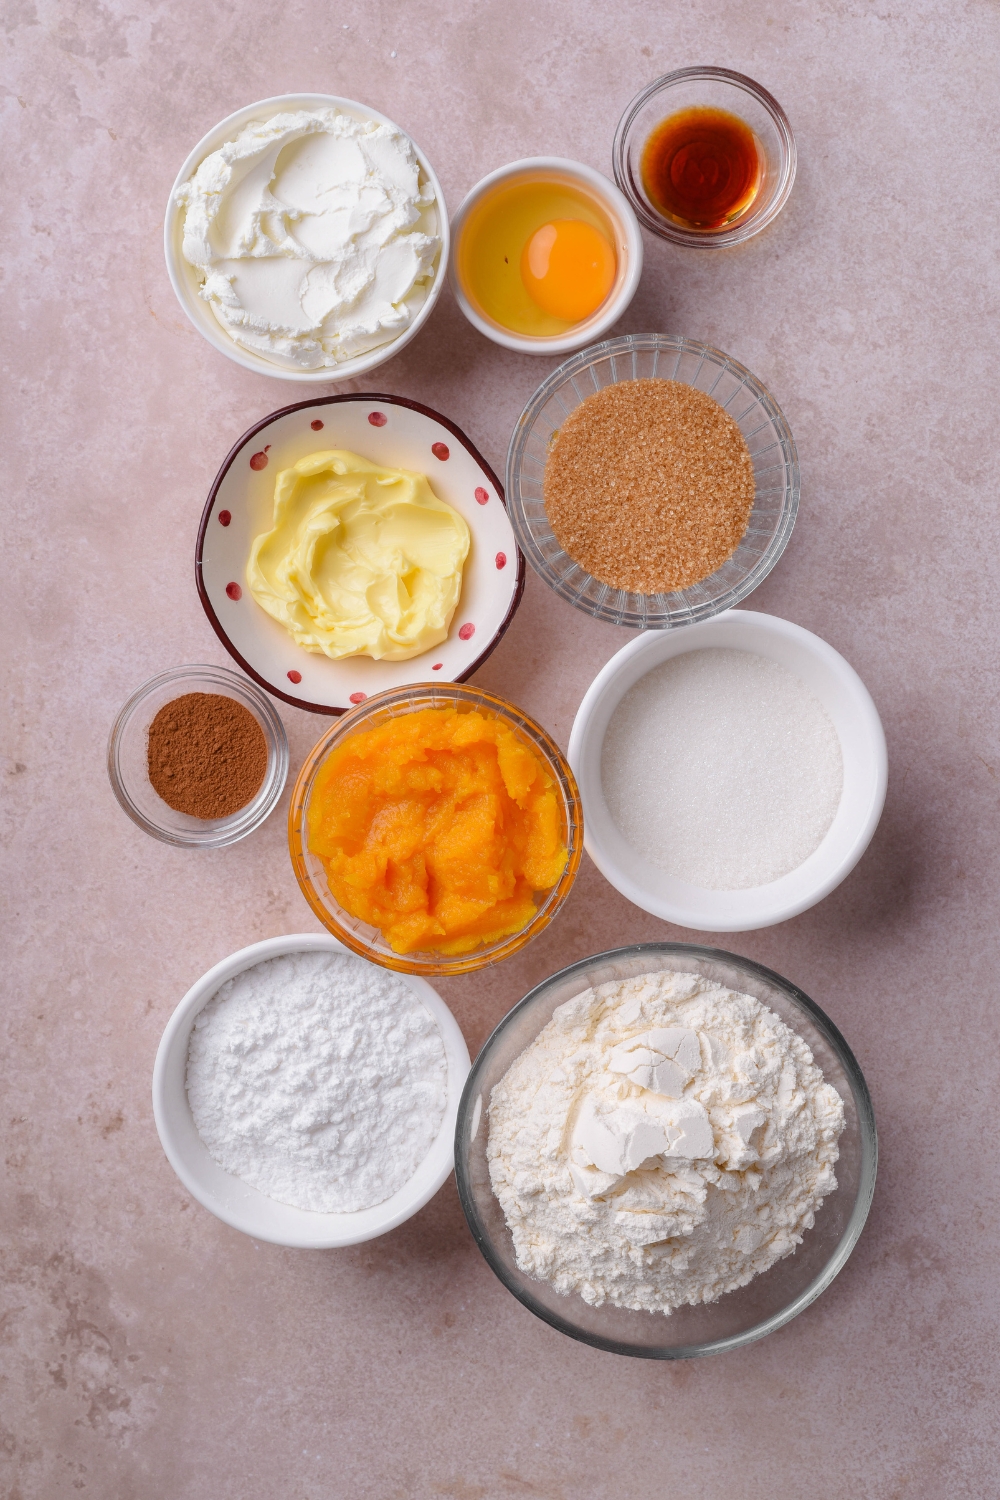 An assortment of ingredients including bowls of pumpkin puree, butter, flour, sugar, vanilla extract, spices, cream cheese, and an unbeaten egg.